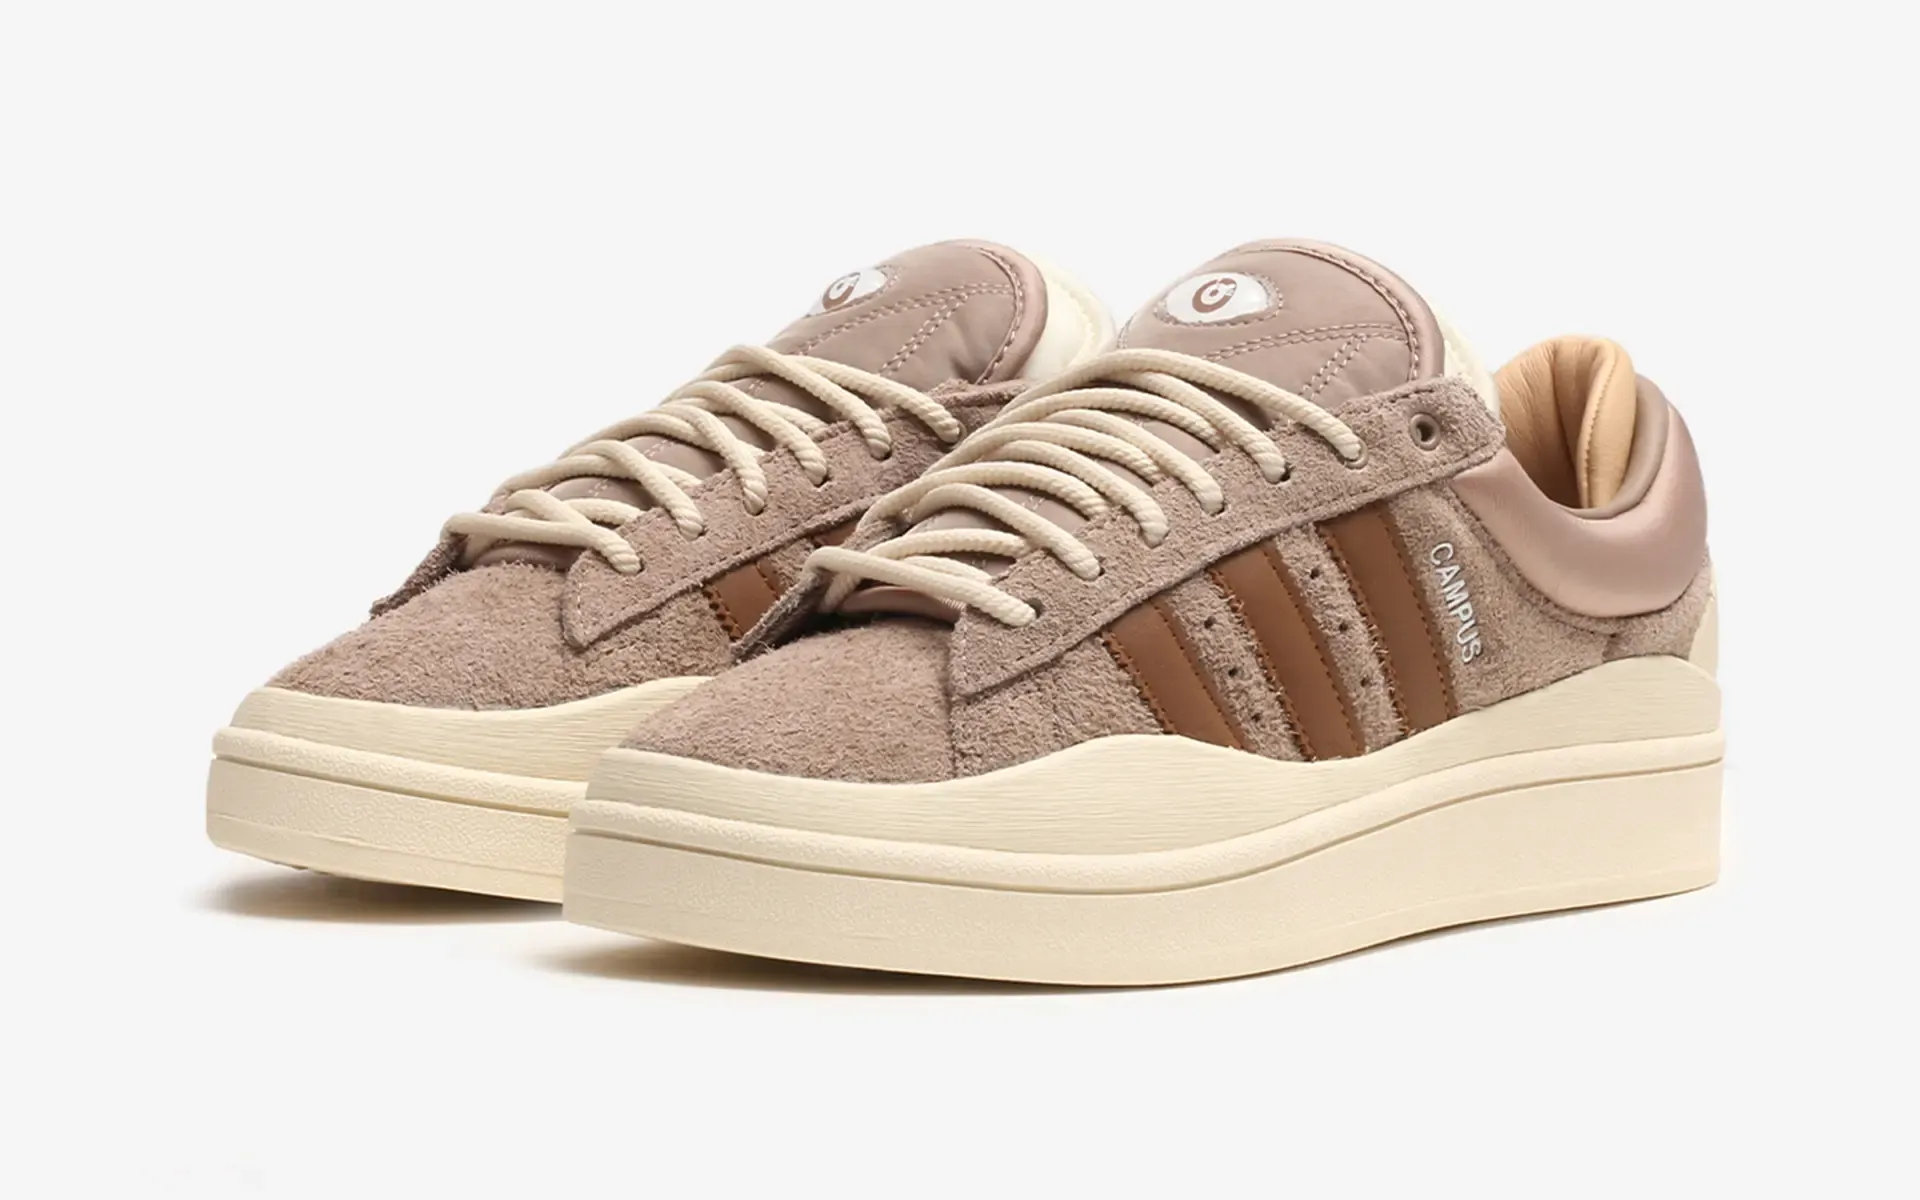 TheSiteSupply Images Bad Bunny Adidas Campus Brown Suede I D2529 1 Release Info